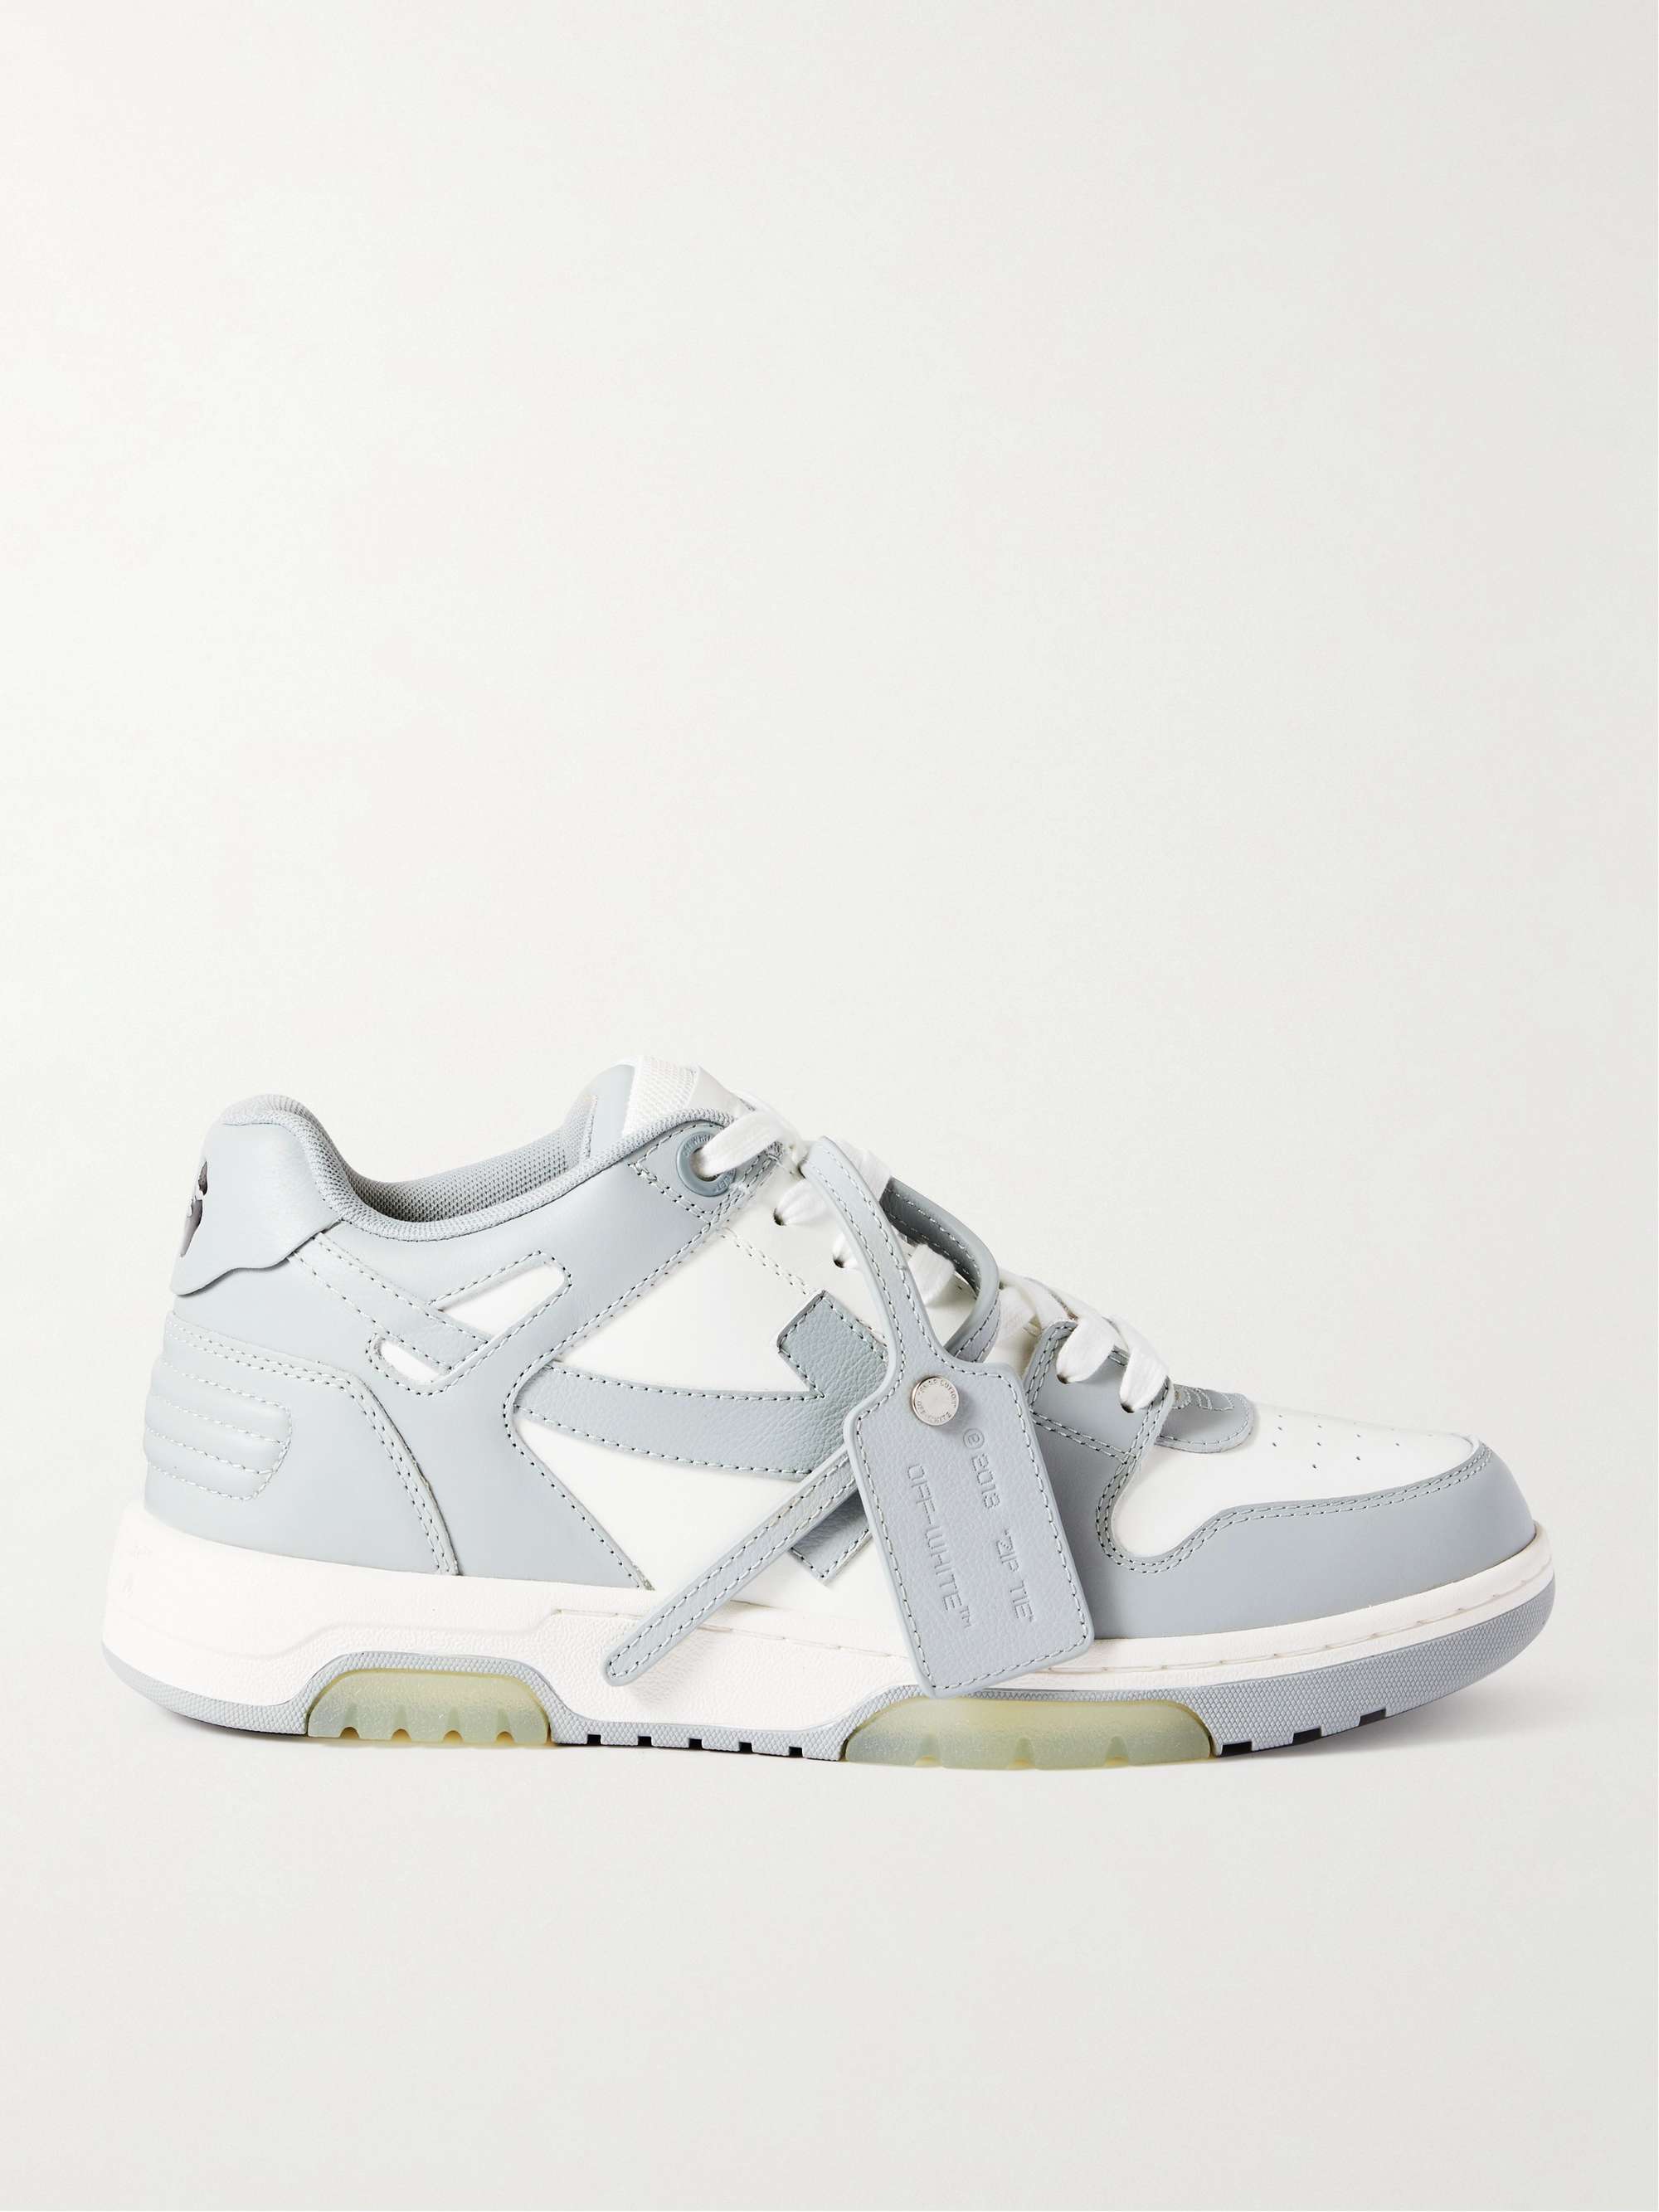 Off-White Men's Out Of Office Leather Mid-Top Sneakers